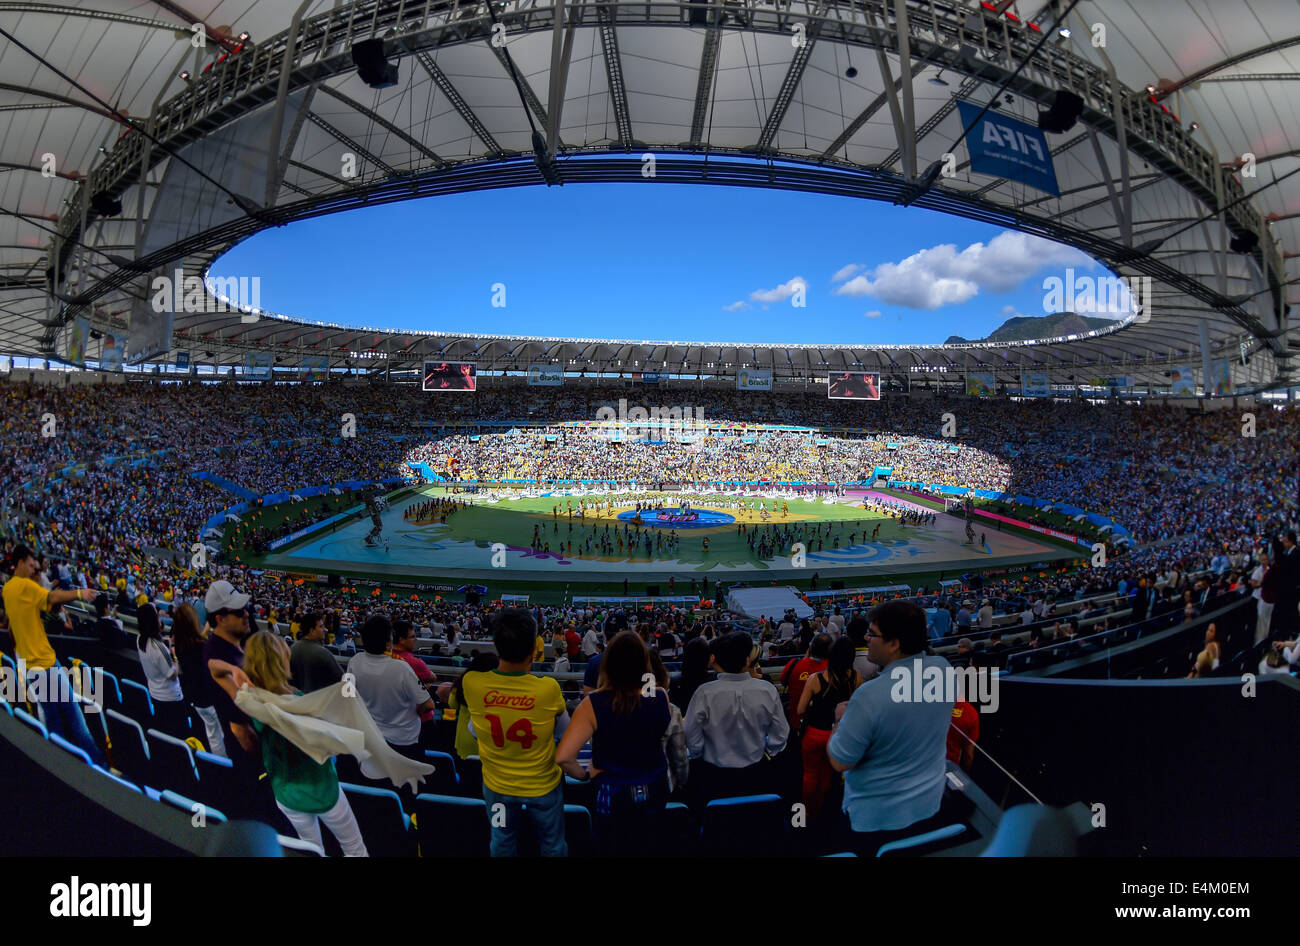 Rio de Janeiro, Brazil. 13th July, 2014. The closing ceremony during the FIFA World Cup 2014 final soccer match between Germany and Argentina at the Estadio do Maracana in Rio de Janeiro, Brazil, 13 July 2014. Photo: Thomas Eisenhuth/dpa/Alamy Live News Stock Photo